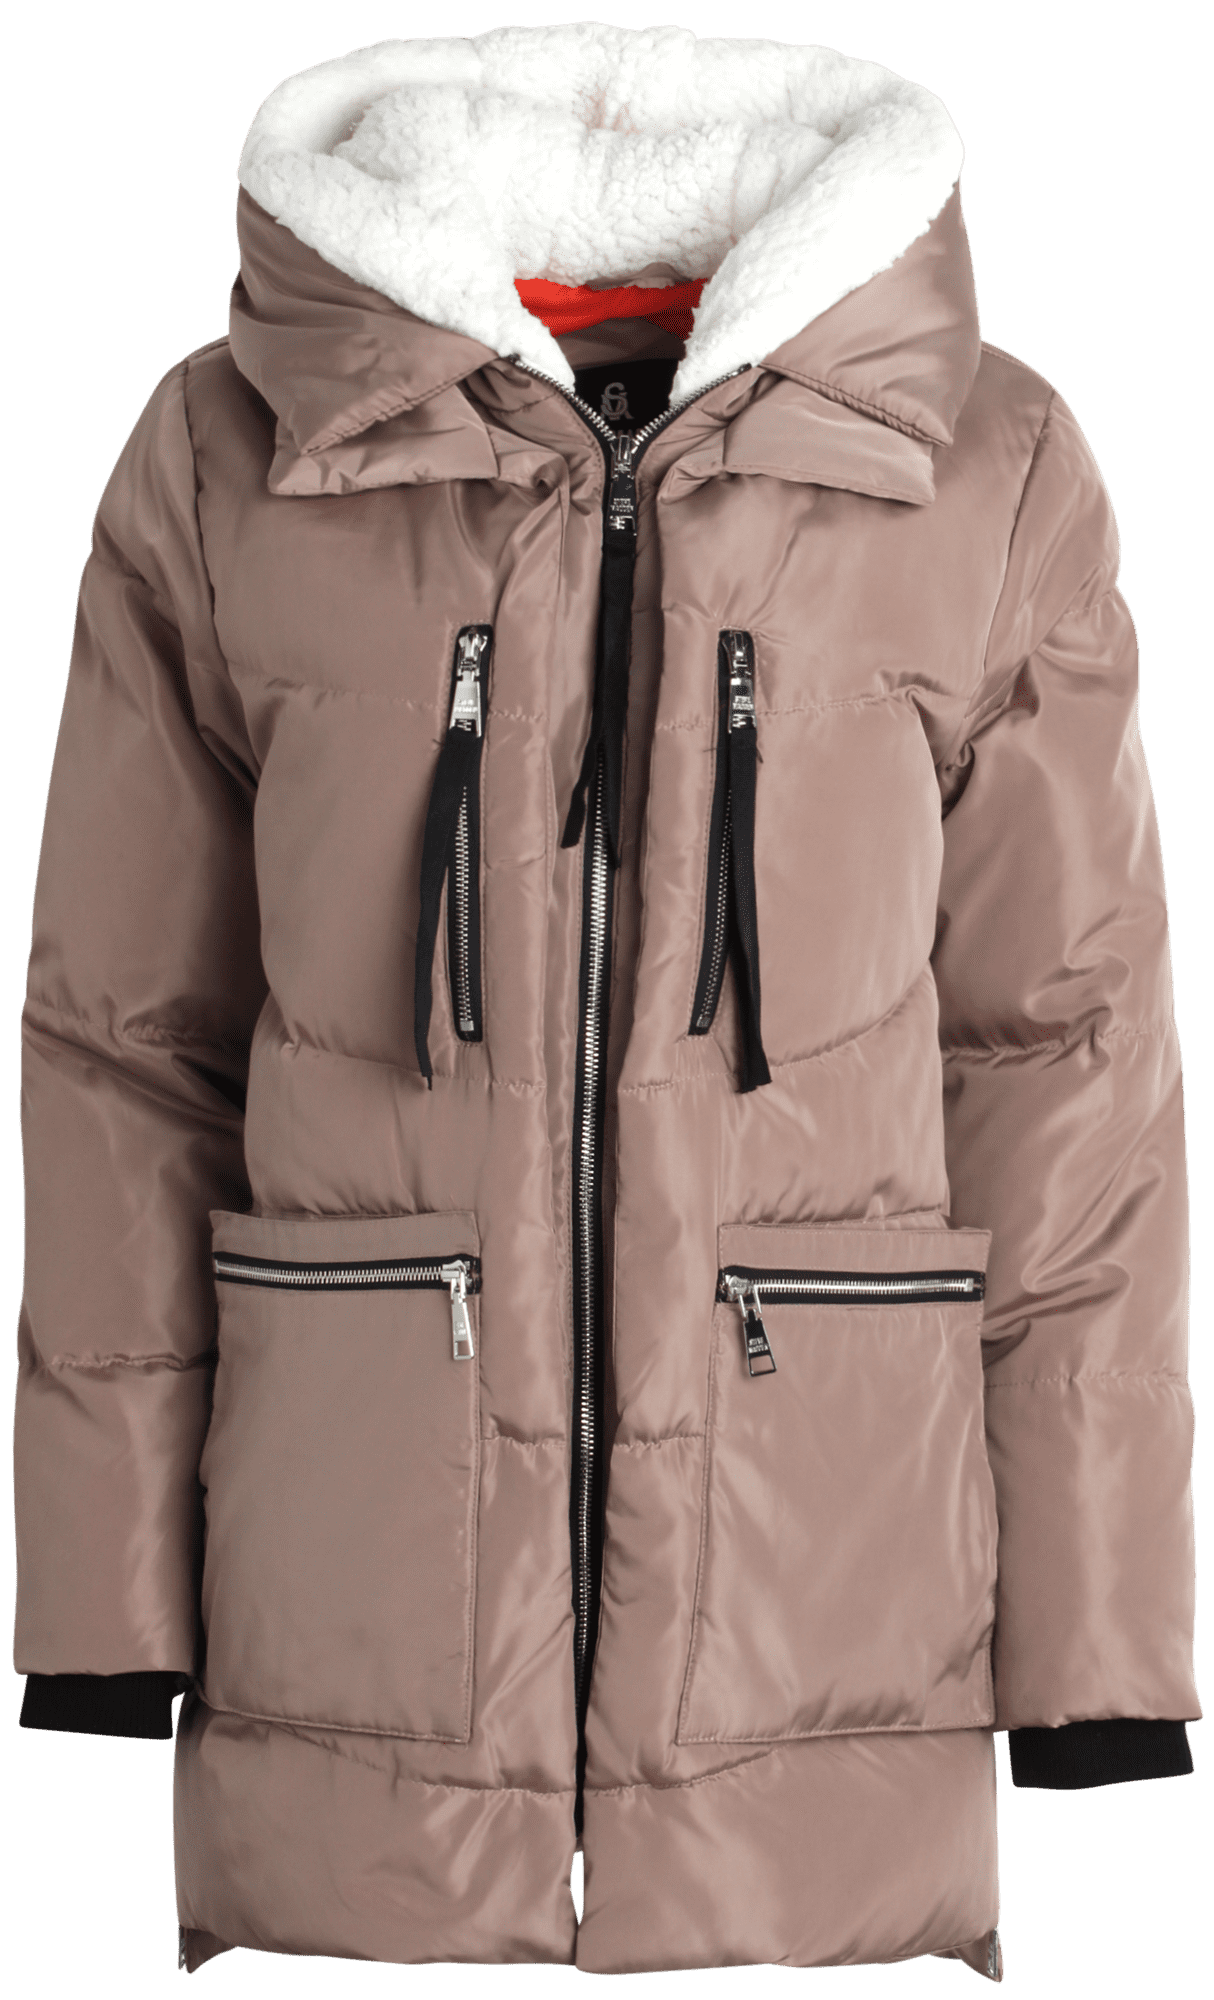 Steve Madden Women’s Winter Jacket – Insulated Weather Resistant ...